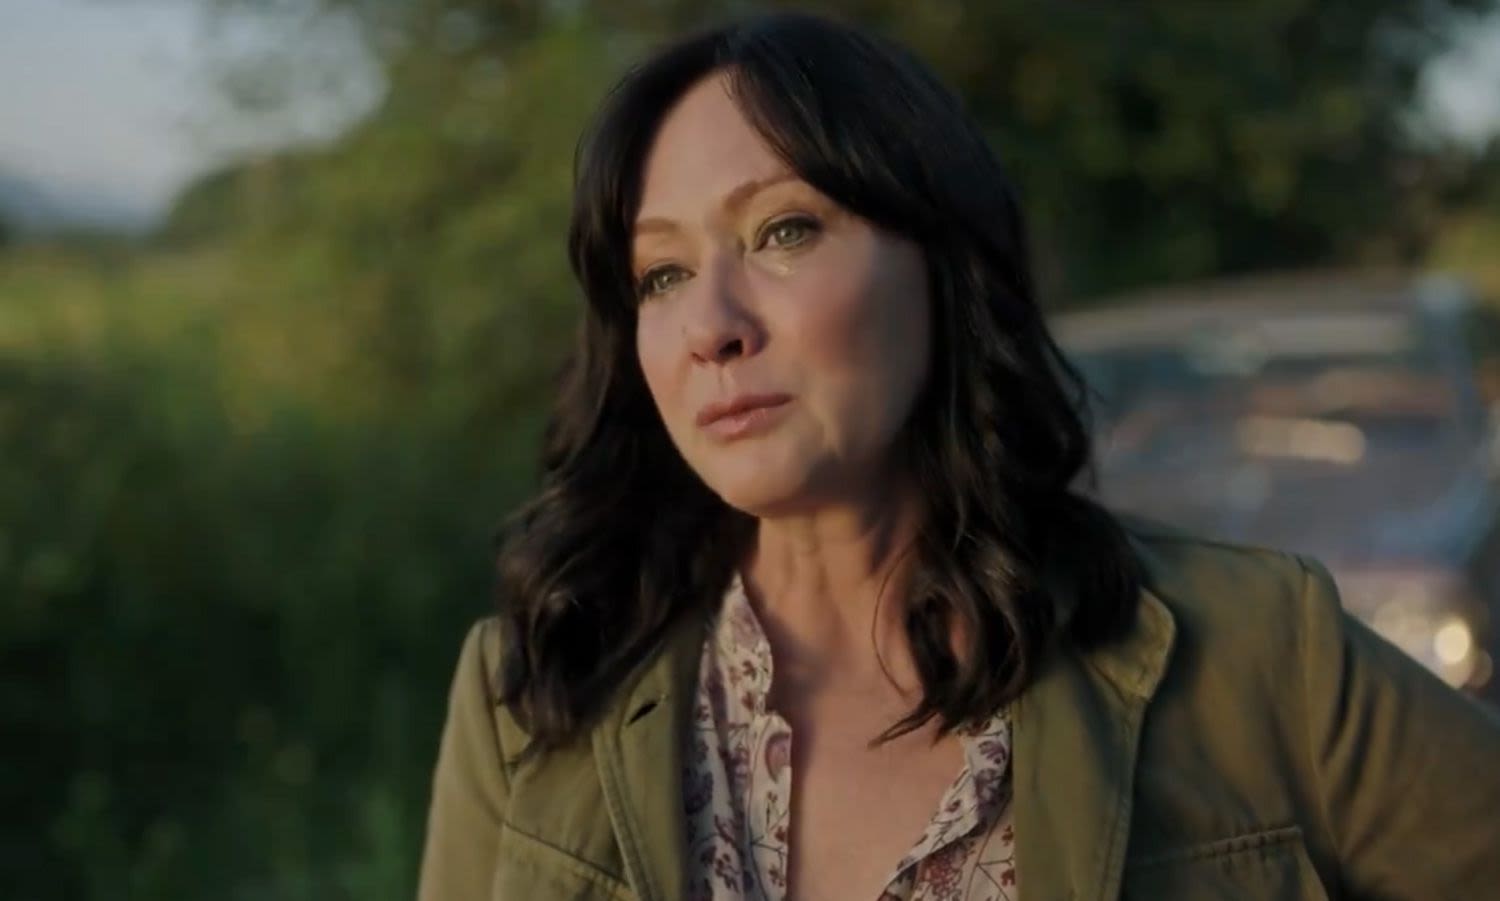 Shannen Doherty Paid Tribute to Luke Perry with Emotional “Riverdale” Cameo: 'He Saved My Life'